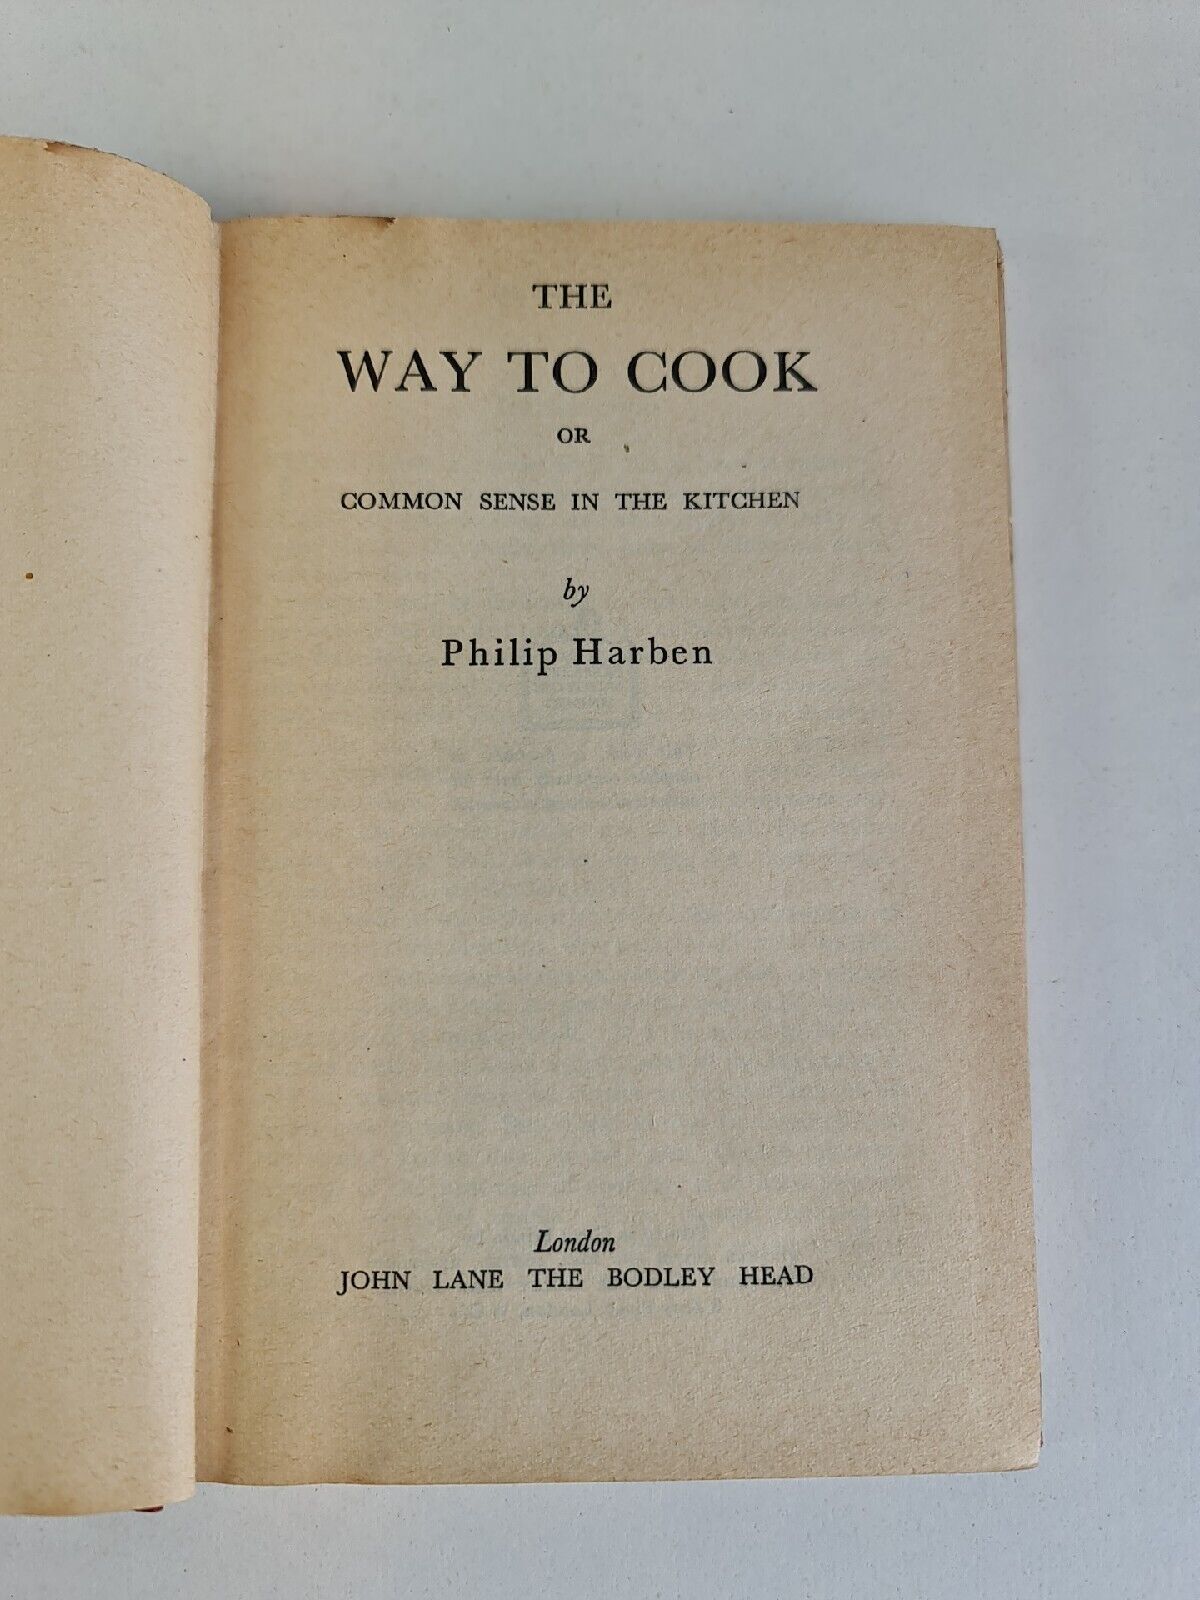 The Way to Cook or Common Sense in the Kitchen by Philip Harben (1945)